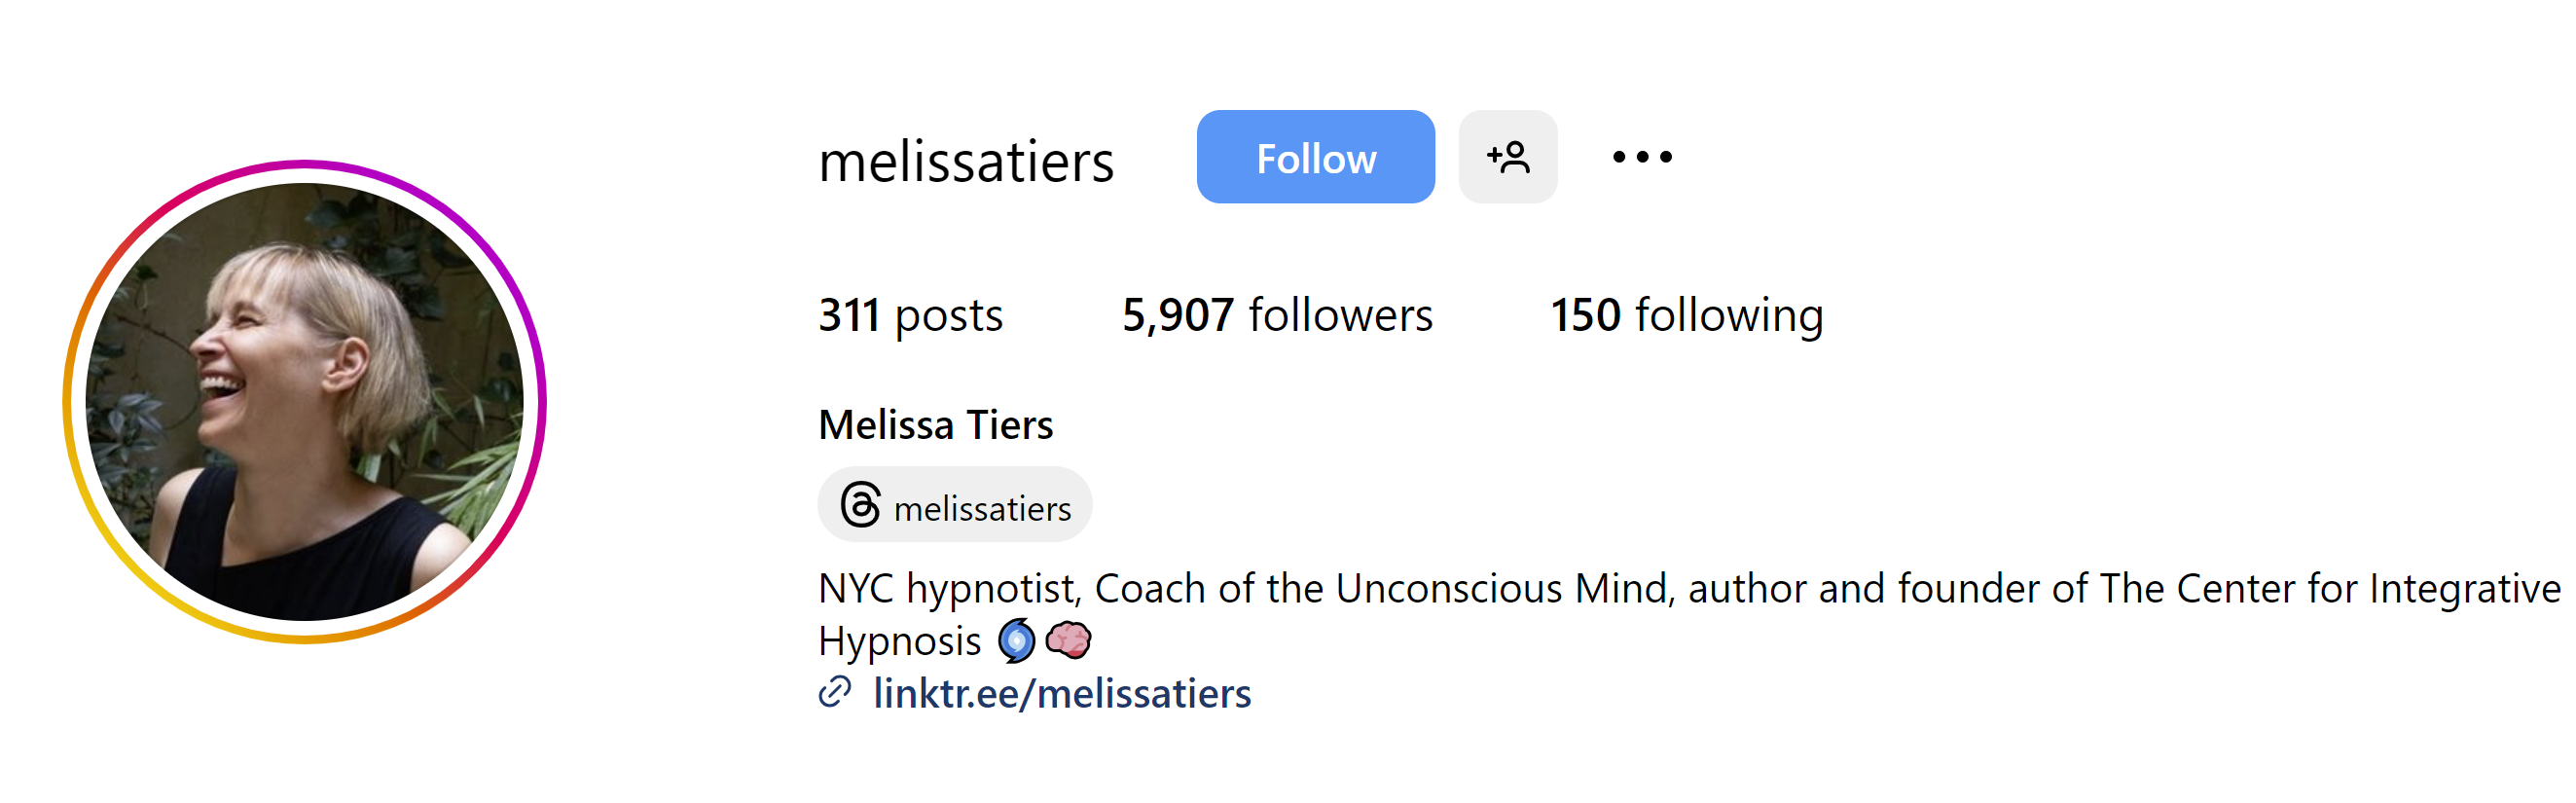 Who Is Melissa Tiers